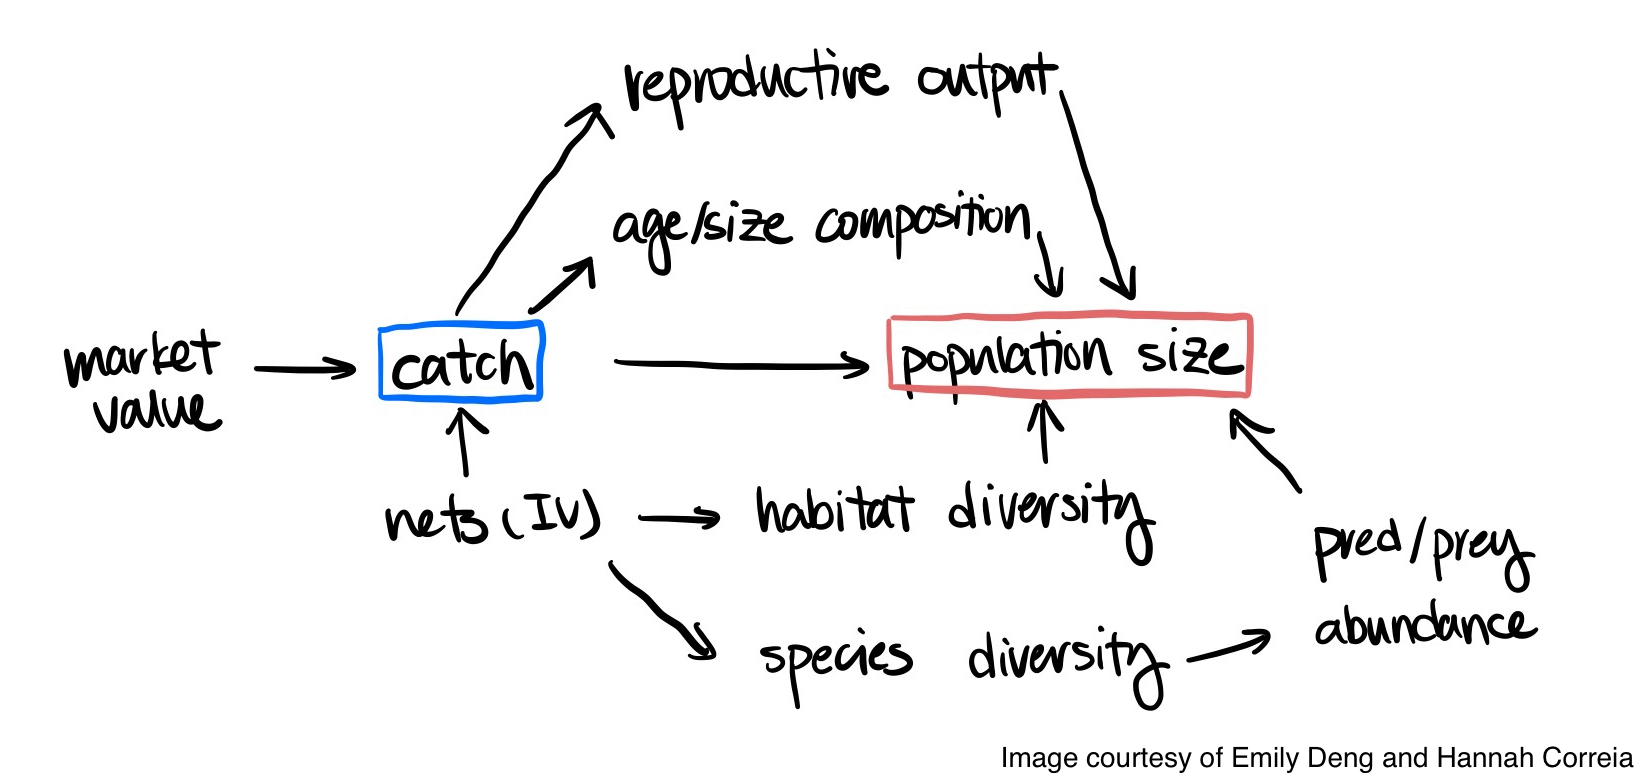 Causal diagram of hypothesized causal relationships between market value, catch, and population size of commercially important marine fish.